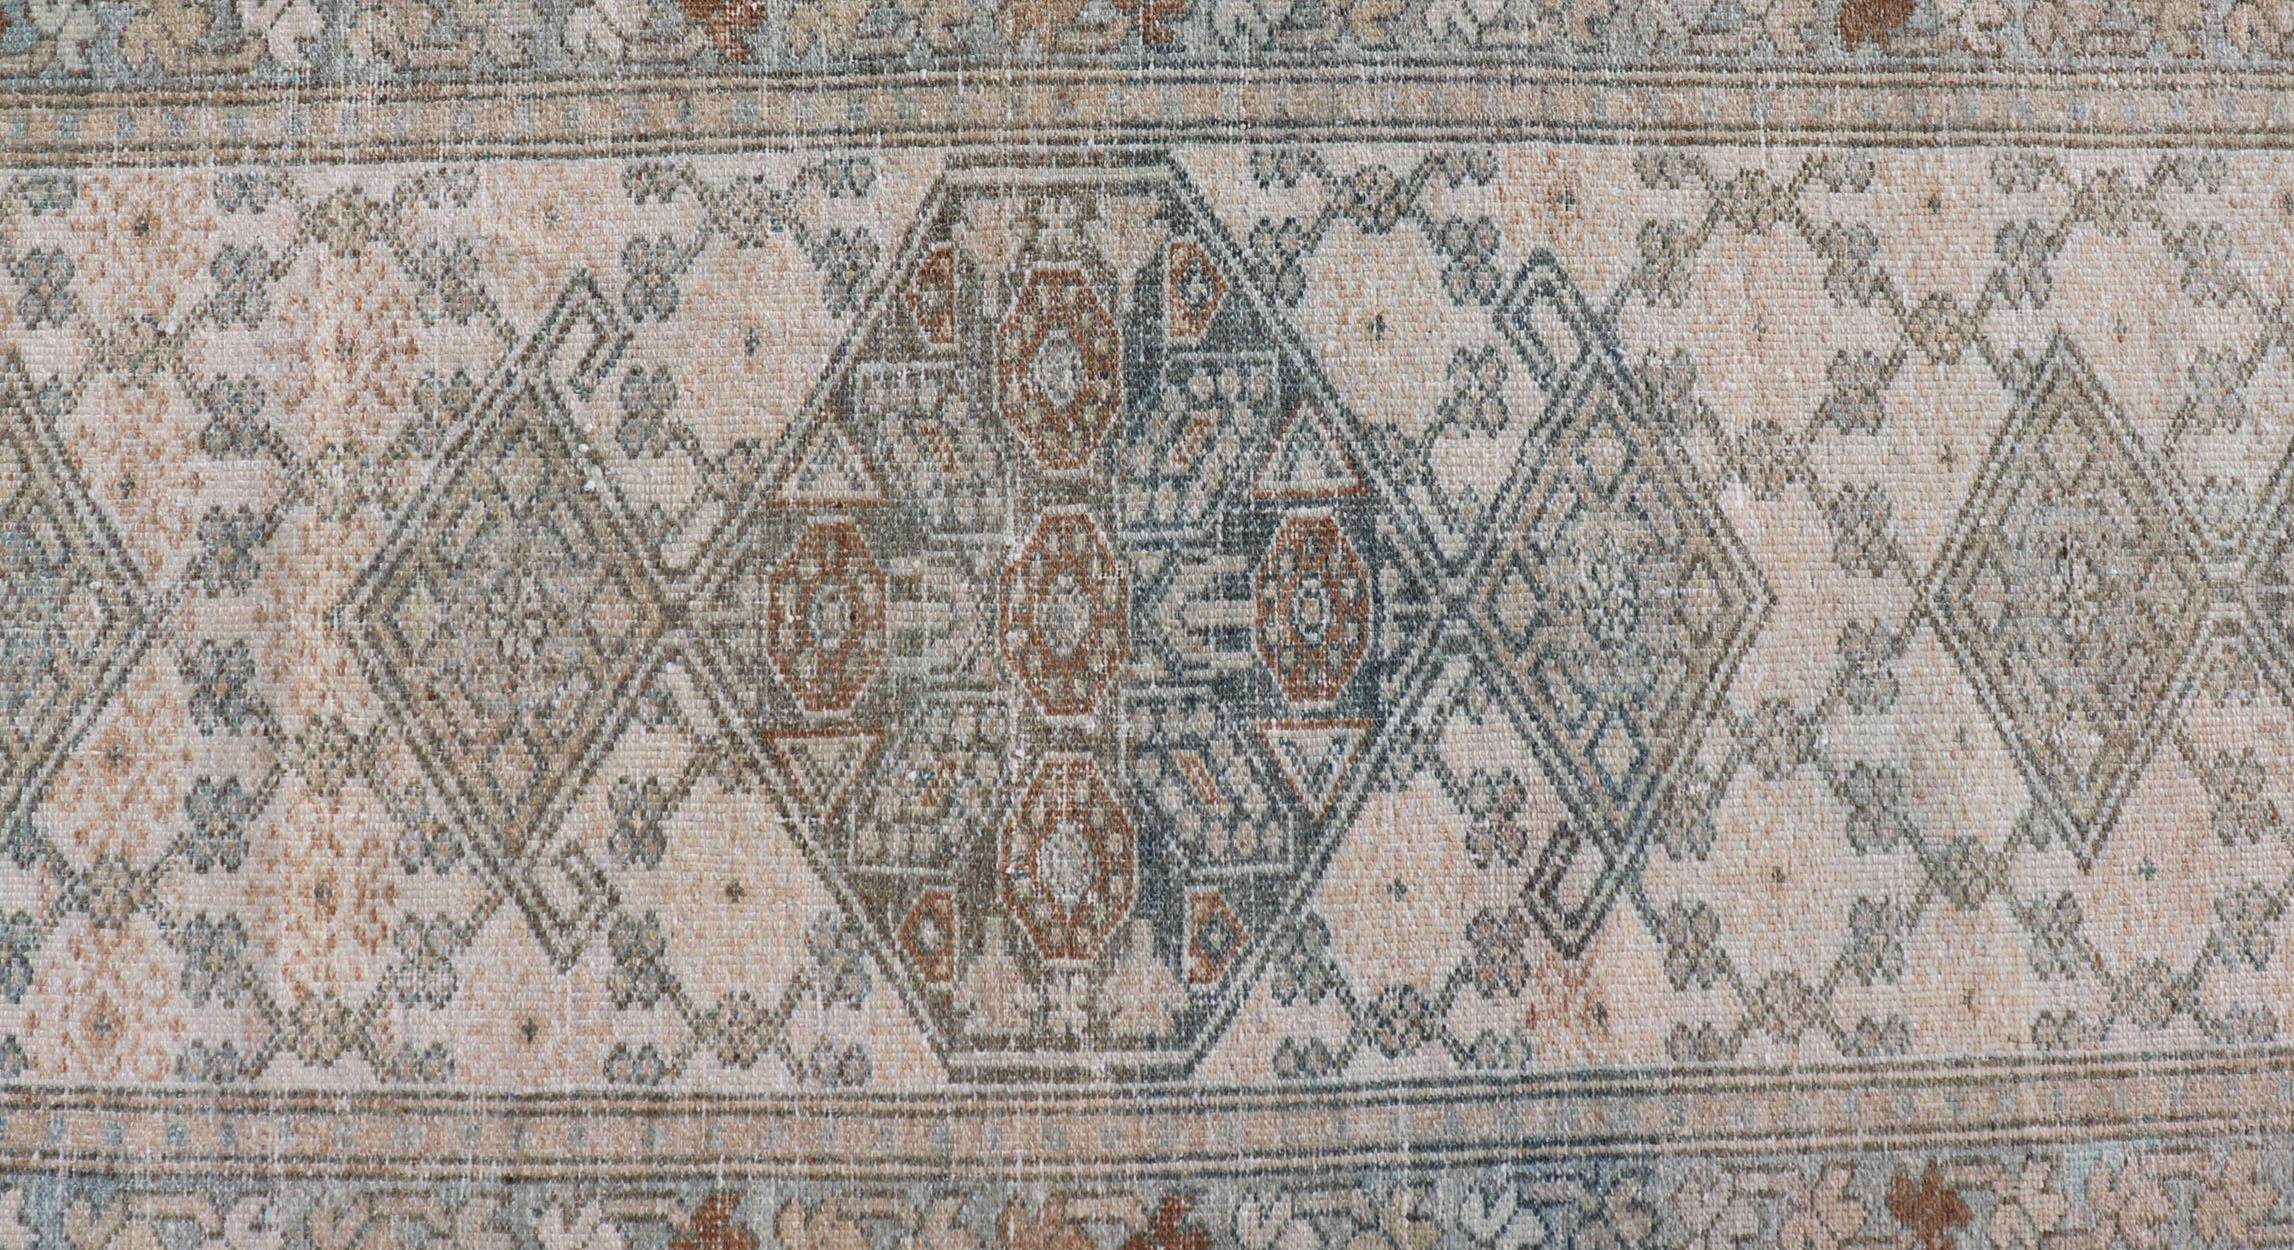 Malayer Antique Persian Sarab Runner with Sub-Geometric Design in Light Blue, Tan, Grey For Sale